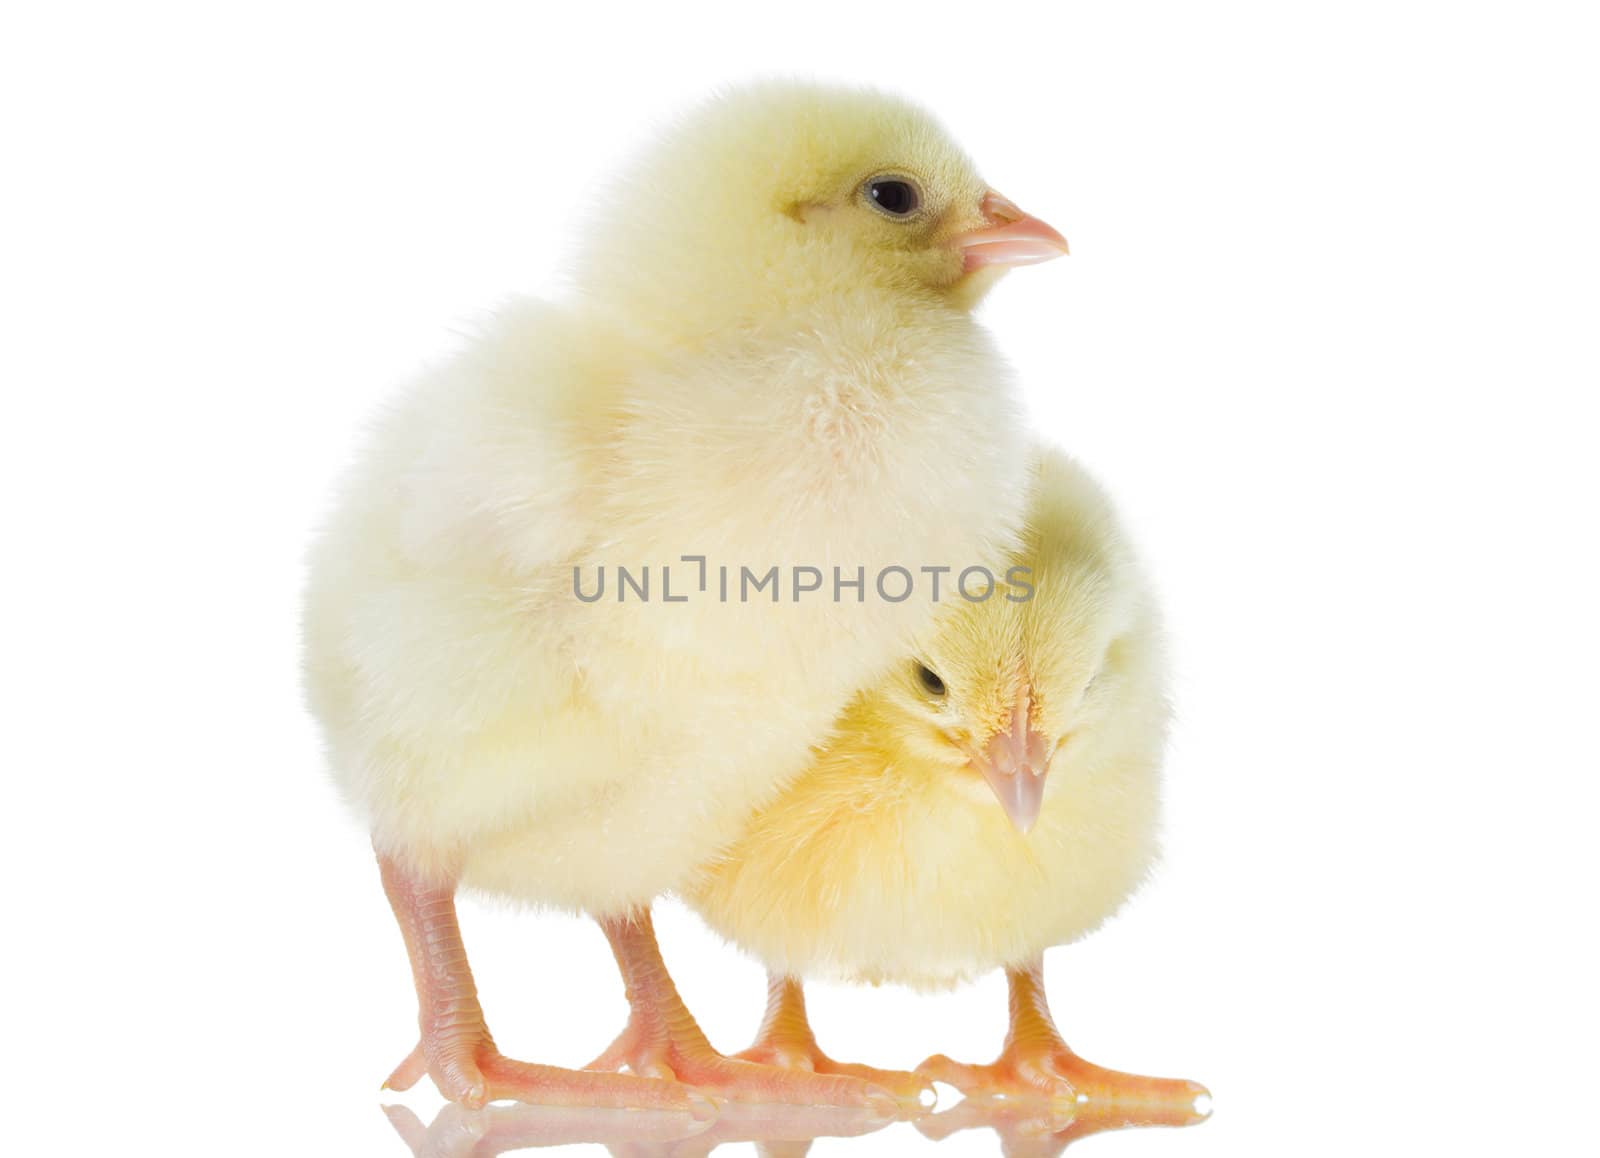 two yellow chicks by Alekcey